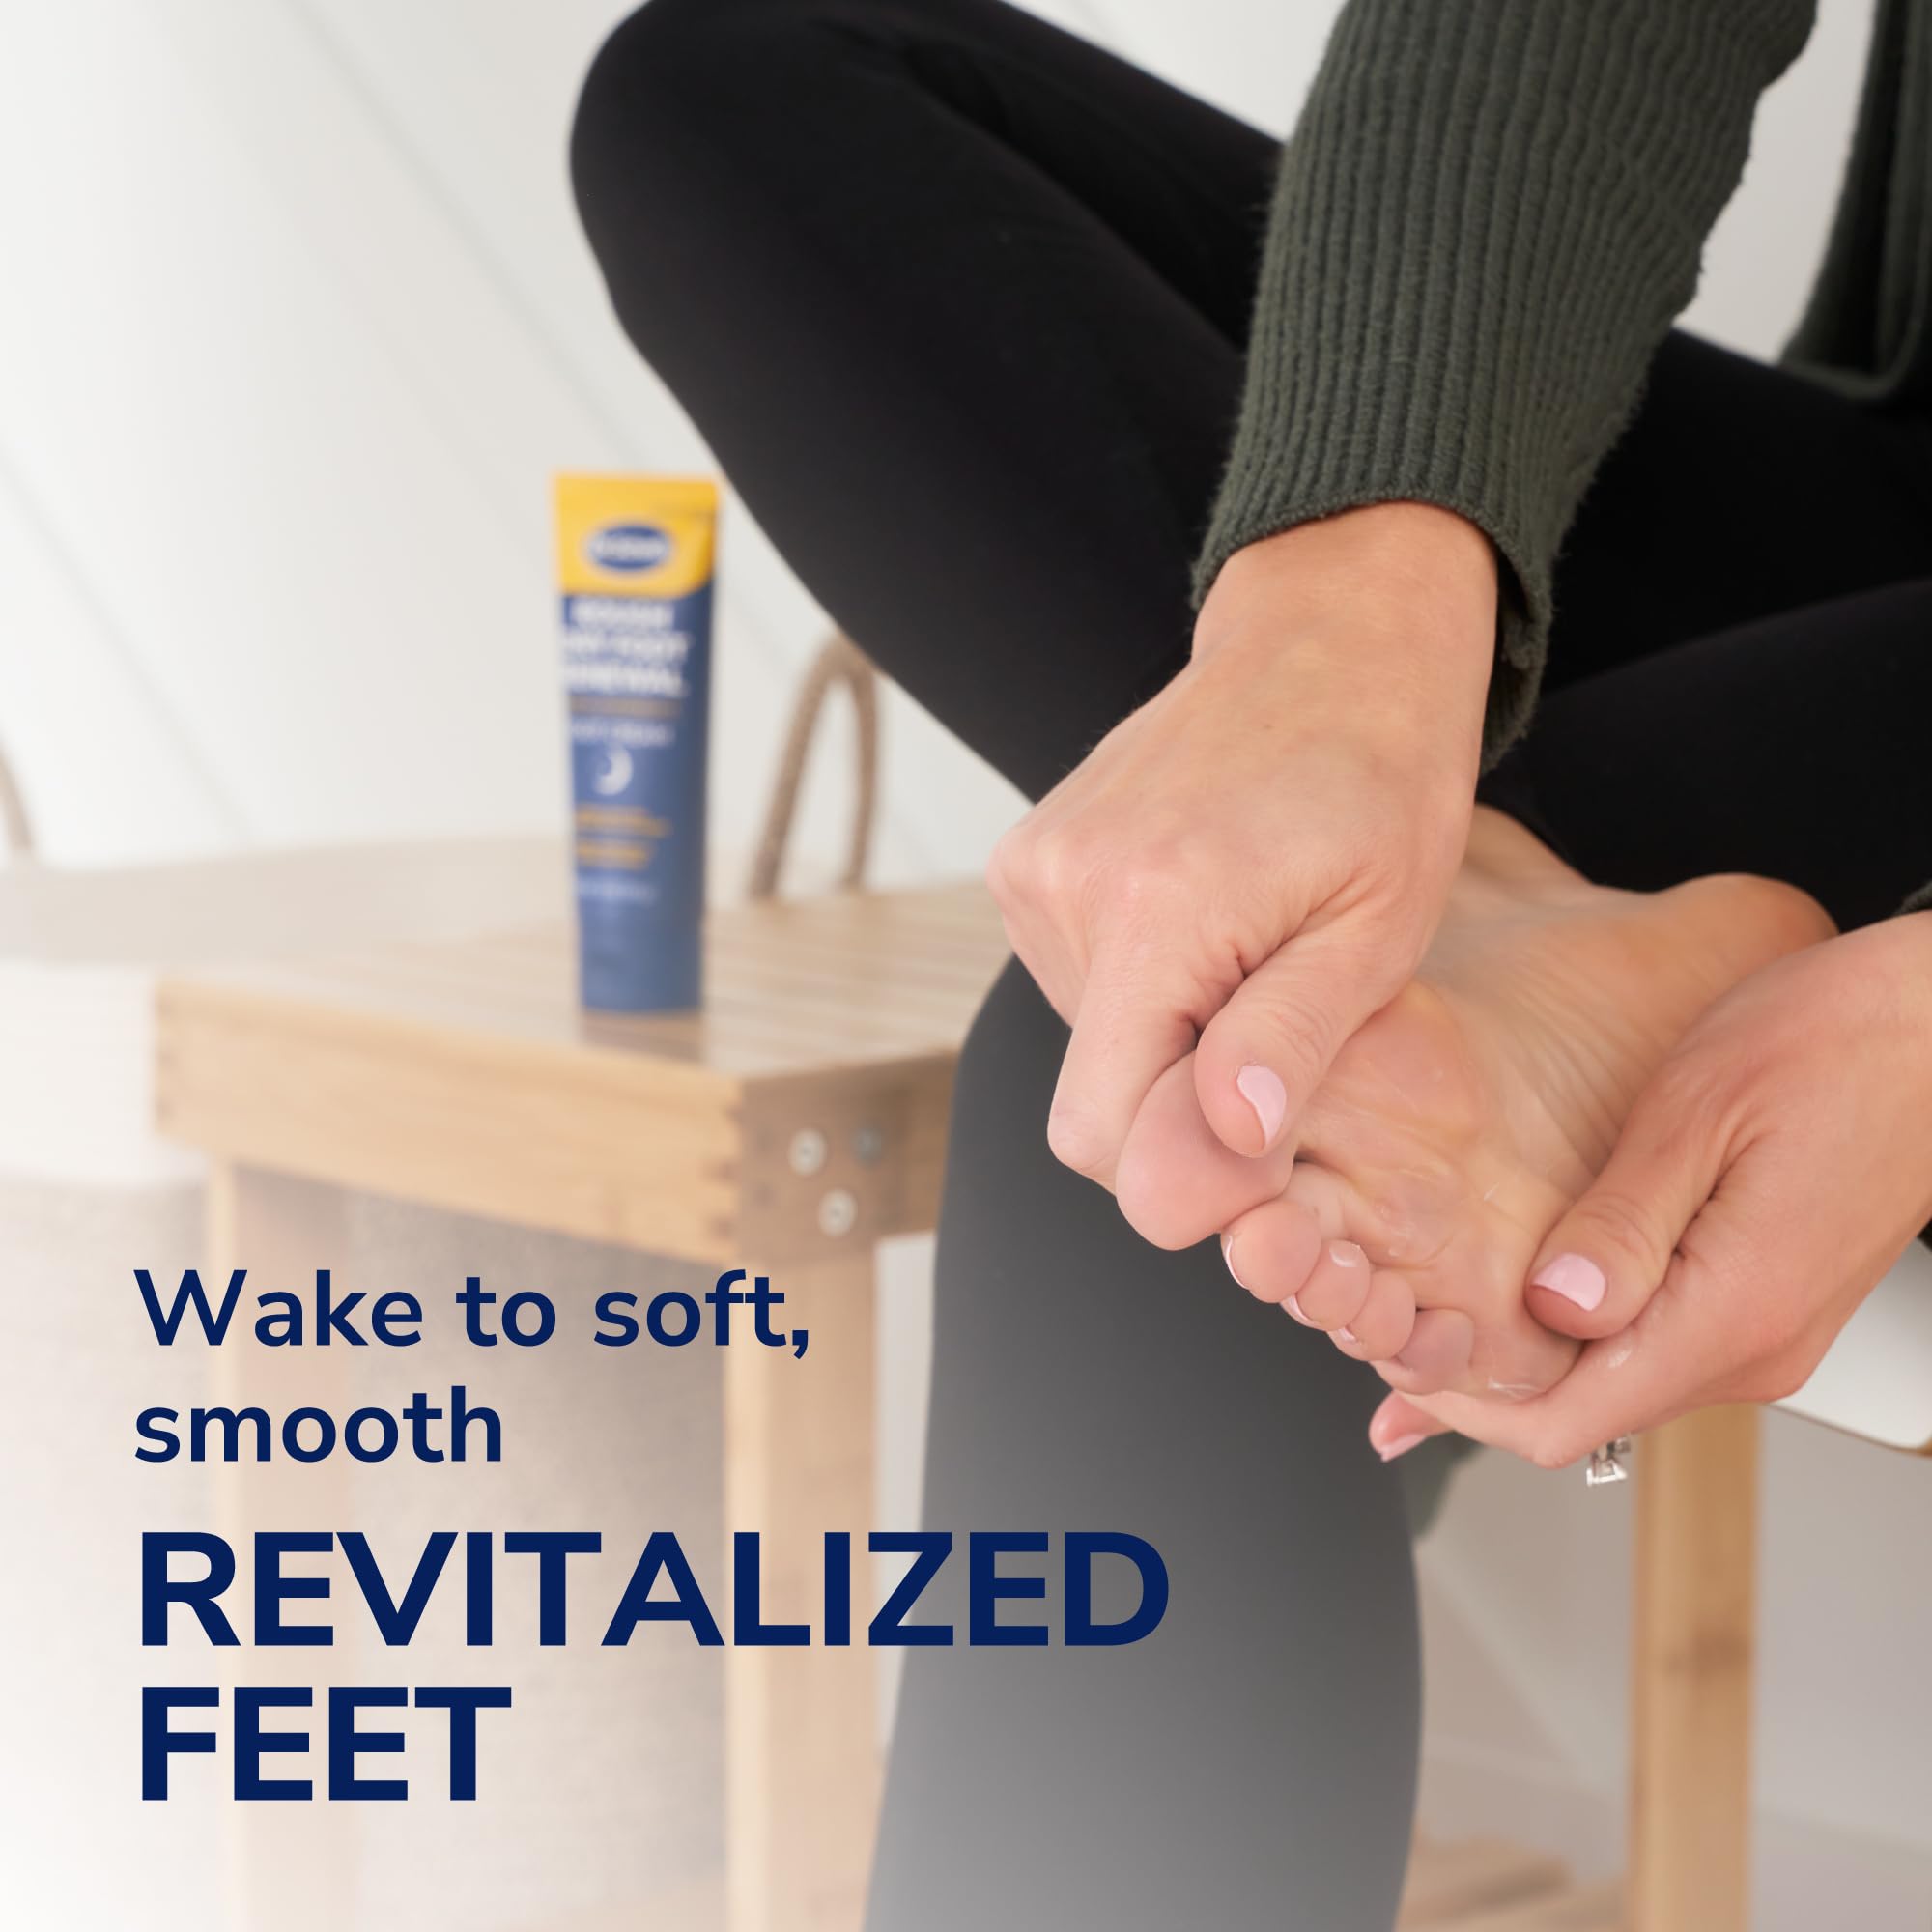 Dr. Scholl's Rough, Dry Foot Renewal Ultra Overnight Treatment with Overnight Foot Cream 3oz with Aloe, Coconut Oil & Urea and Heel Sleeve Socks, Deeply Moisturize & Soften Feet, Dermatologist Tested